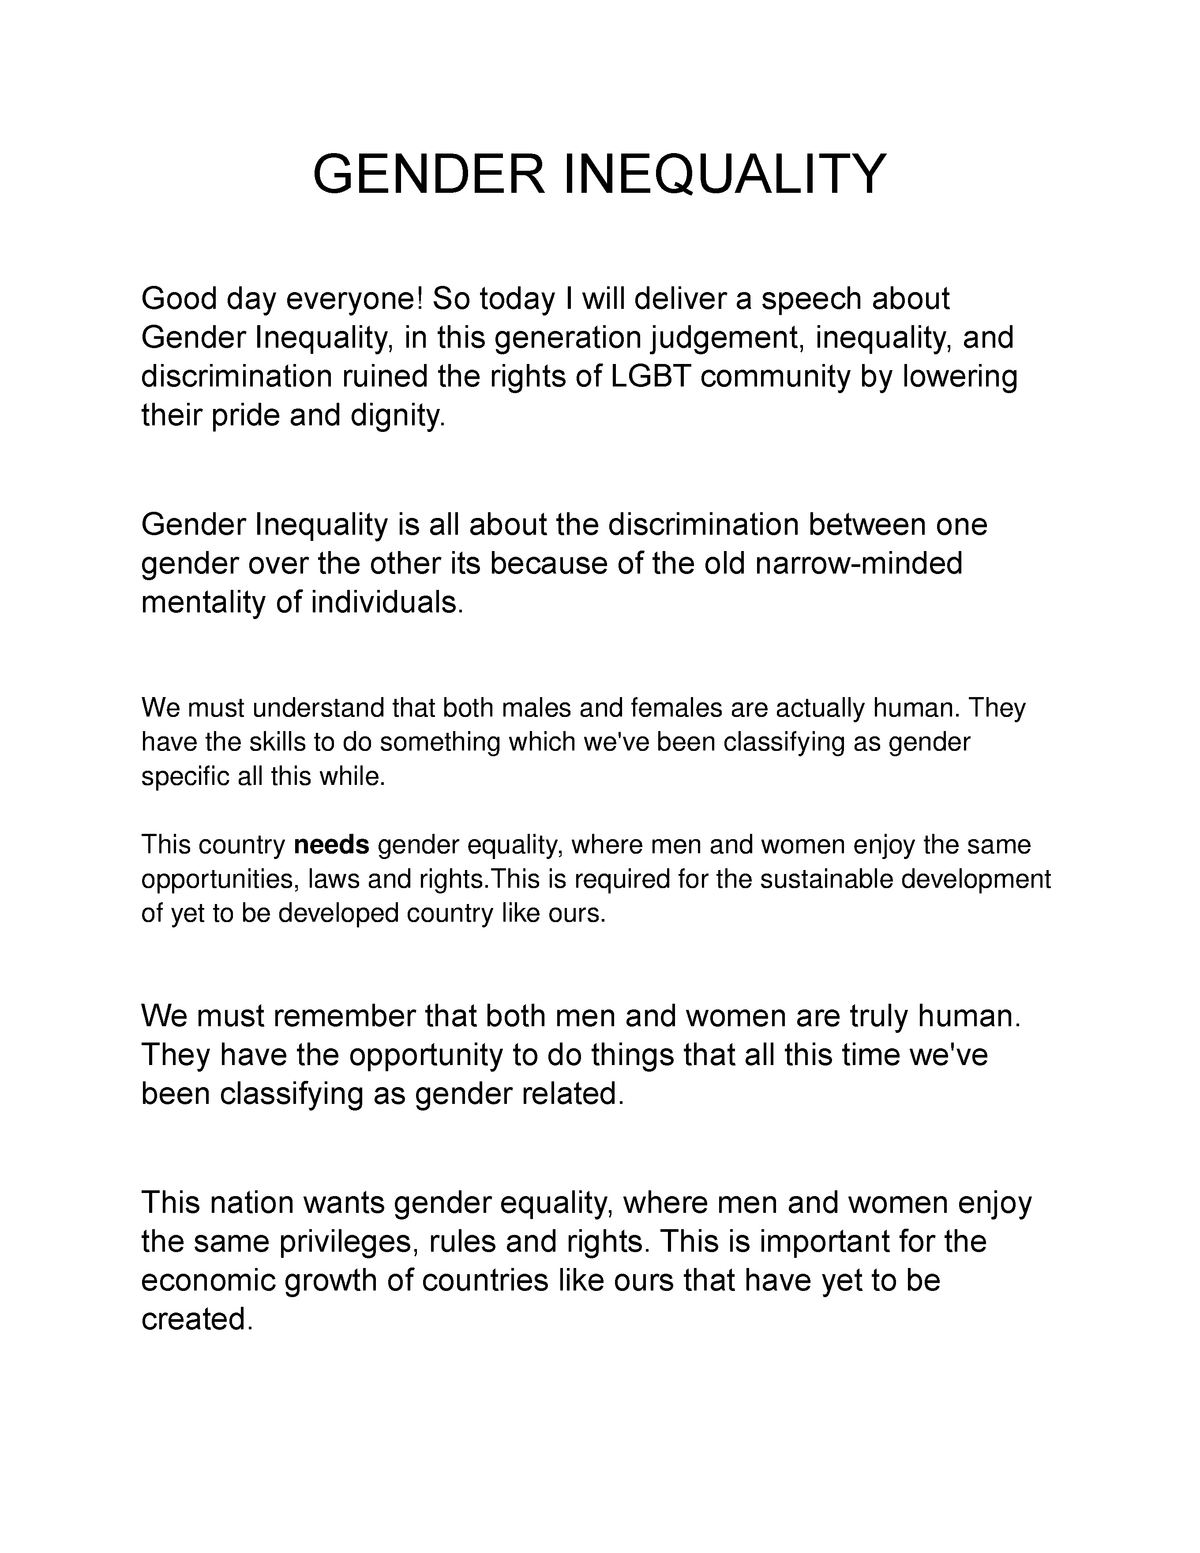 persuasive essay about gender inequality